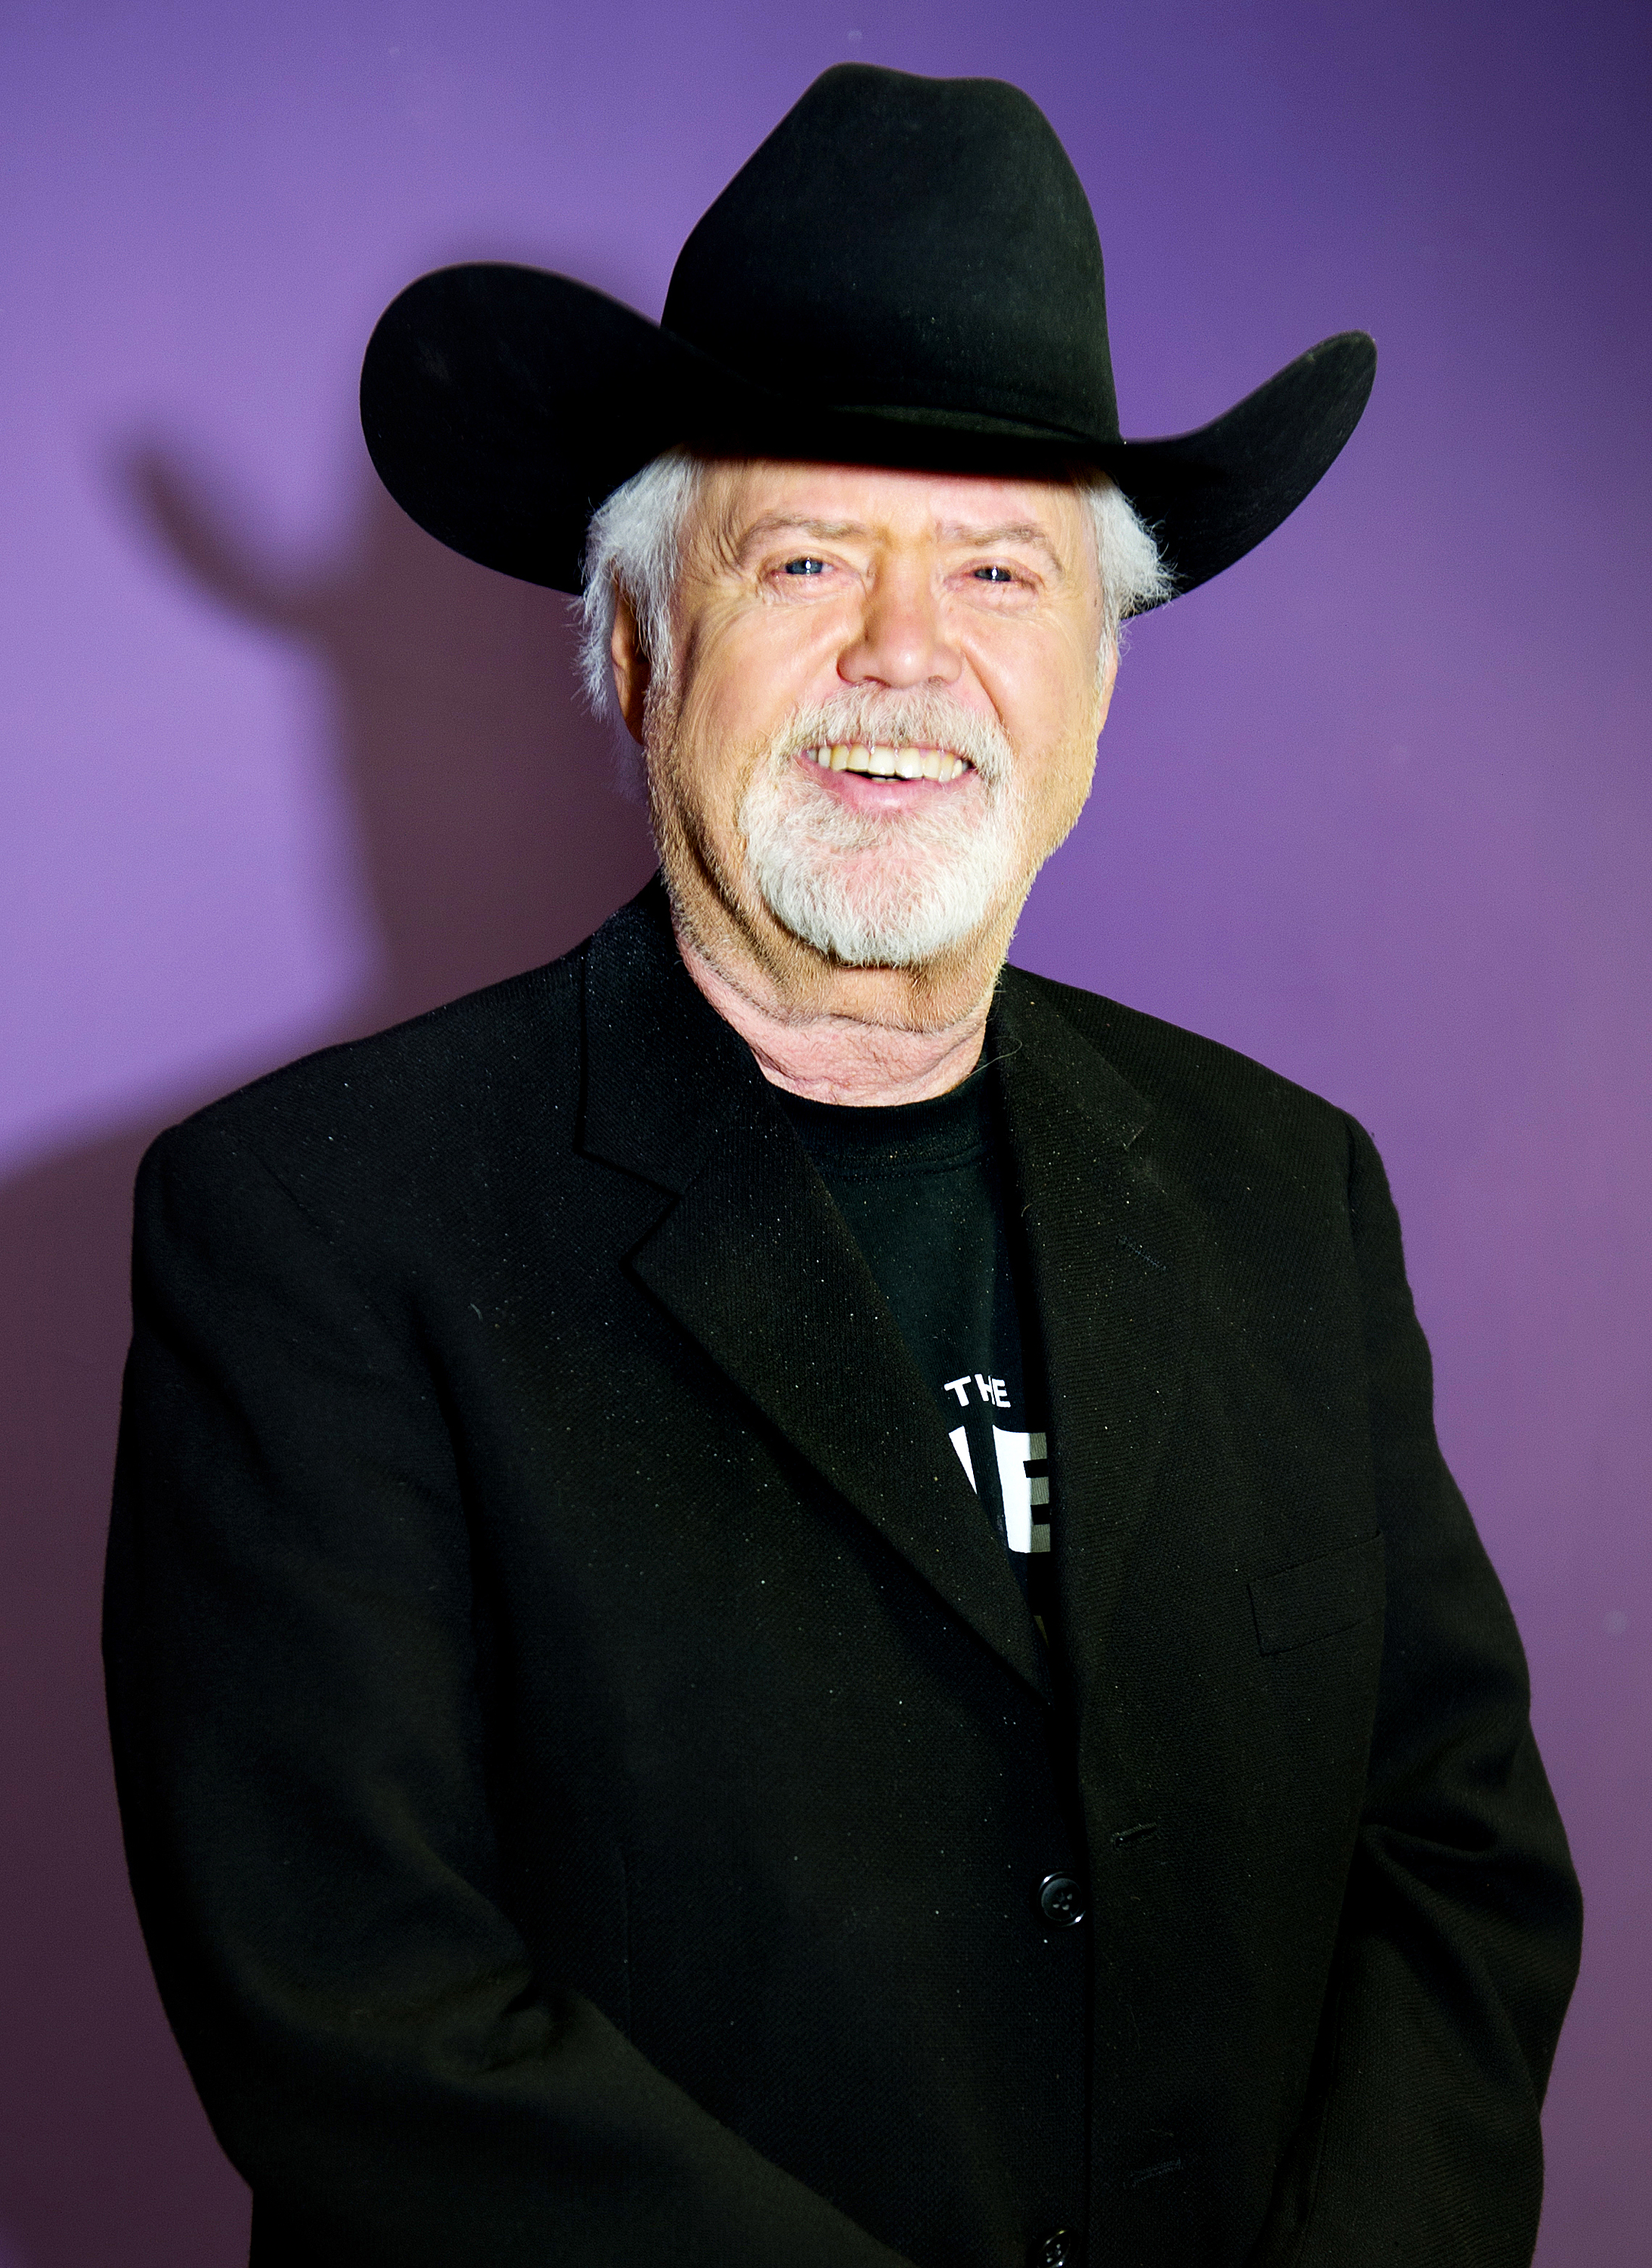 <p>Merrill Osmond continued to perform throughout the years. After the sibling groups disbanded, he teamed up with brother Jay Osmond to keep playing. He transitioned to country music in the late '70s and had one hit in the '80s independent of his siblings -- a duet with Jessica Boucher, "You're Here to Remember (I'm Here to Forget)," in 1987. </p><p>Merrill is still performing: You can next catch him in concert in Cheshire, England in September 2024. In March 2024, he released "Collections," a book of his own inspirational words. </p><p>Merrill was actually the first of the Osmond siblings to get married, tying the knot with Mary Carlson in 1973. The two share four sons and two daughters and these days also have an impressive 15 grandchildren. </p>